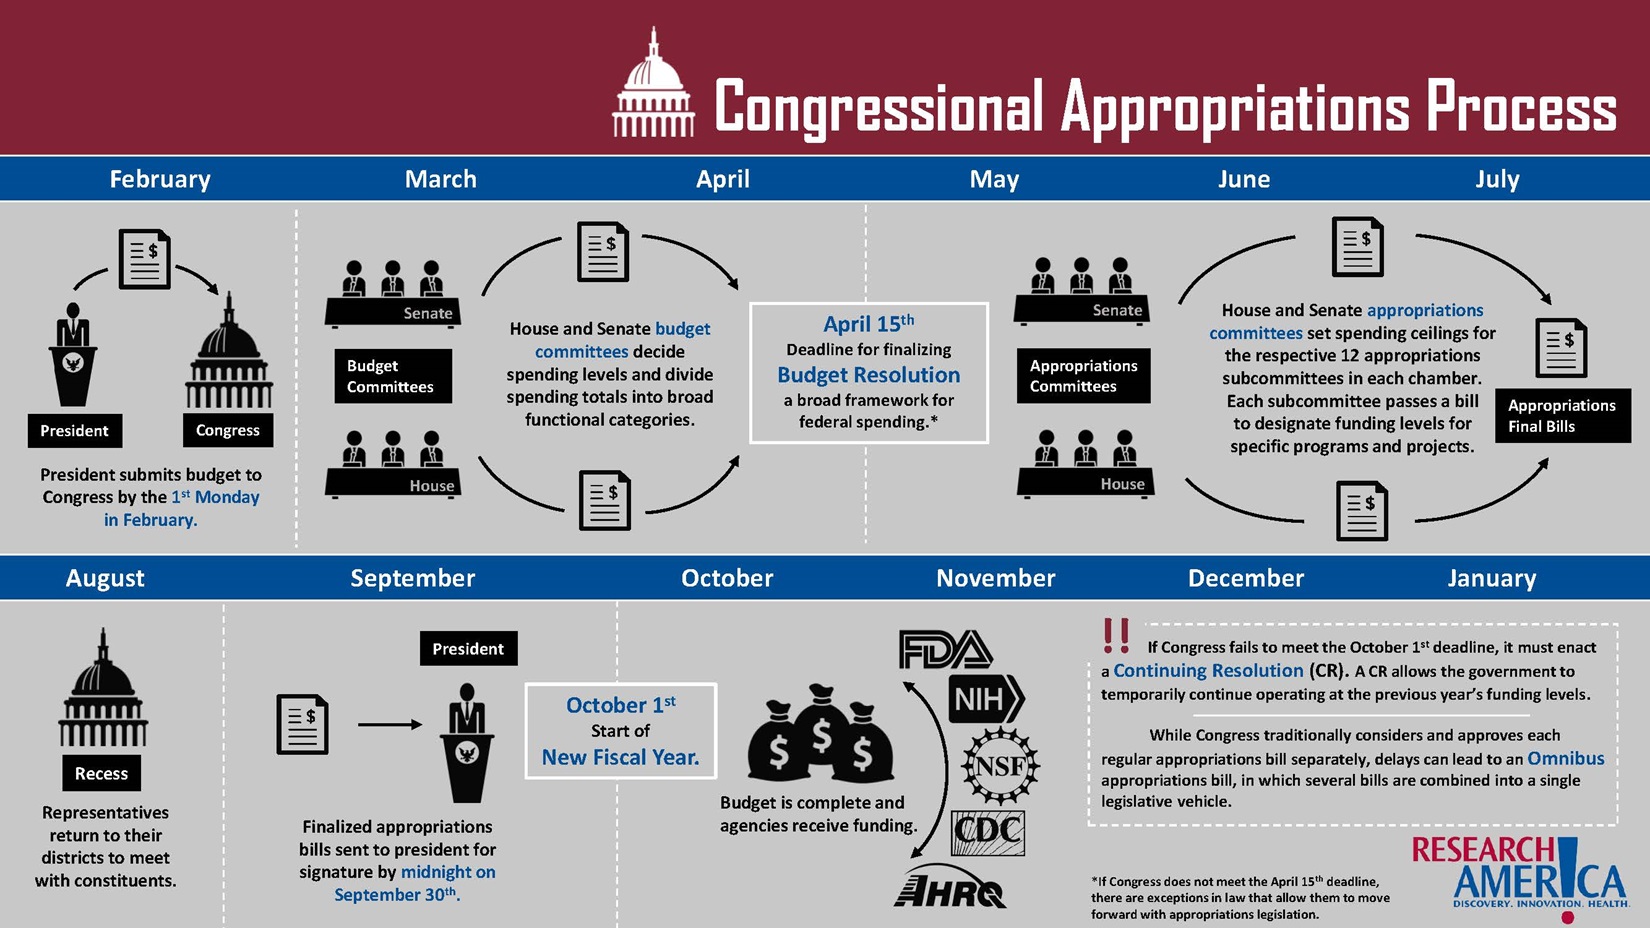 Research!America congressional appropriations process flow chart infographic